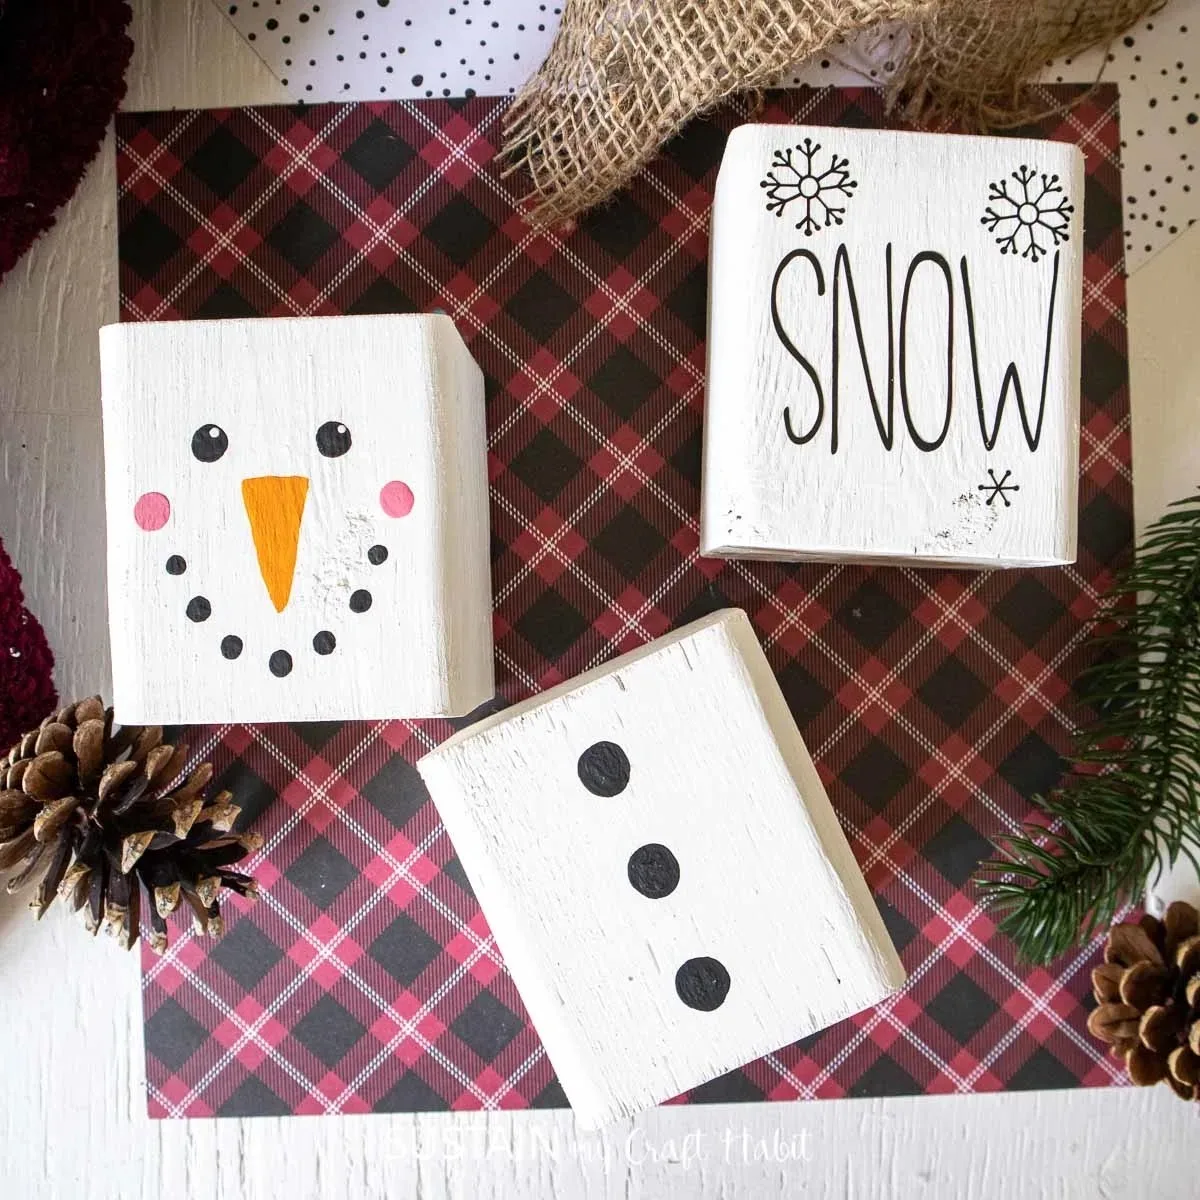 Winter Crafts for Adults to Enjoy All Season Long! - Mod Podge Rocks